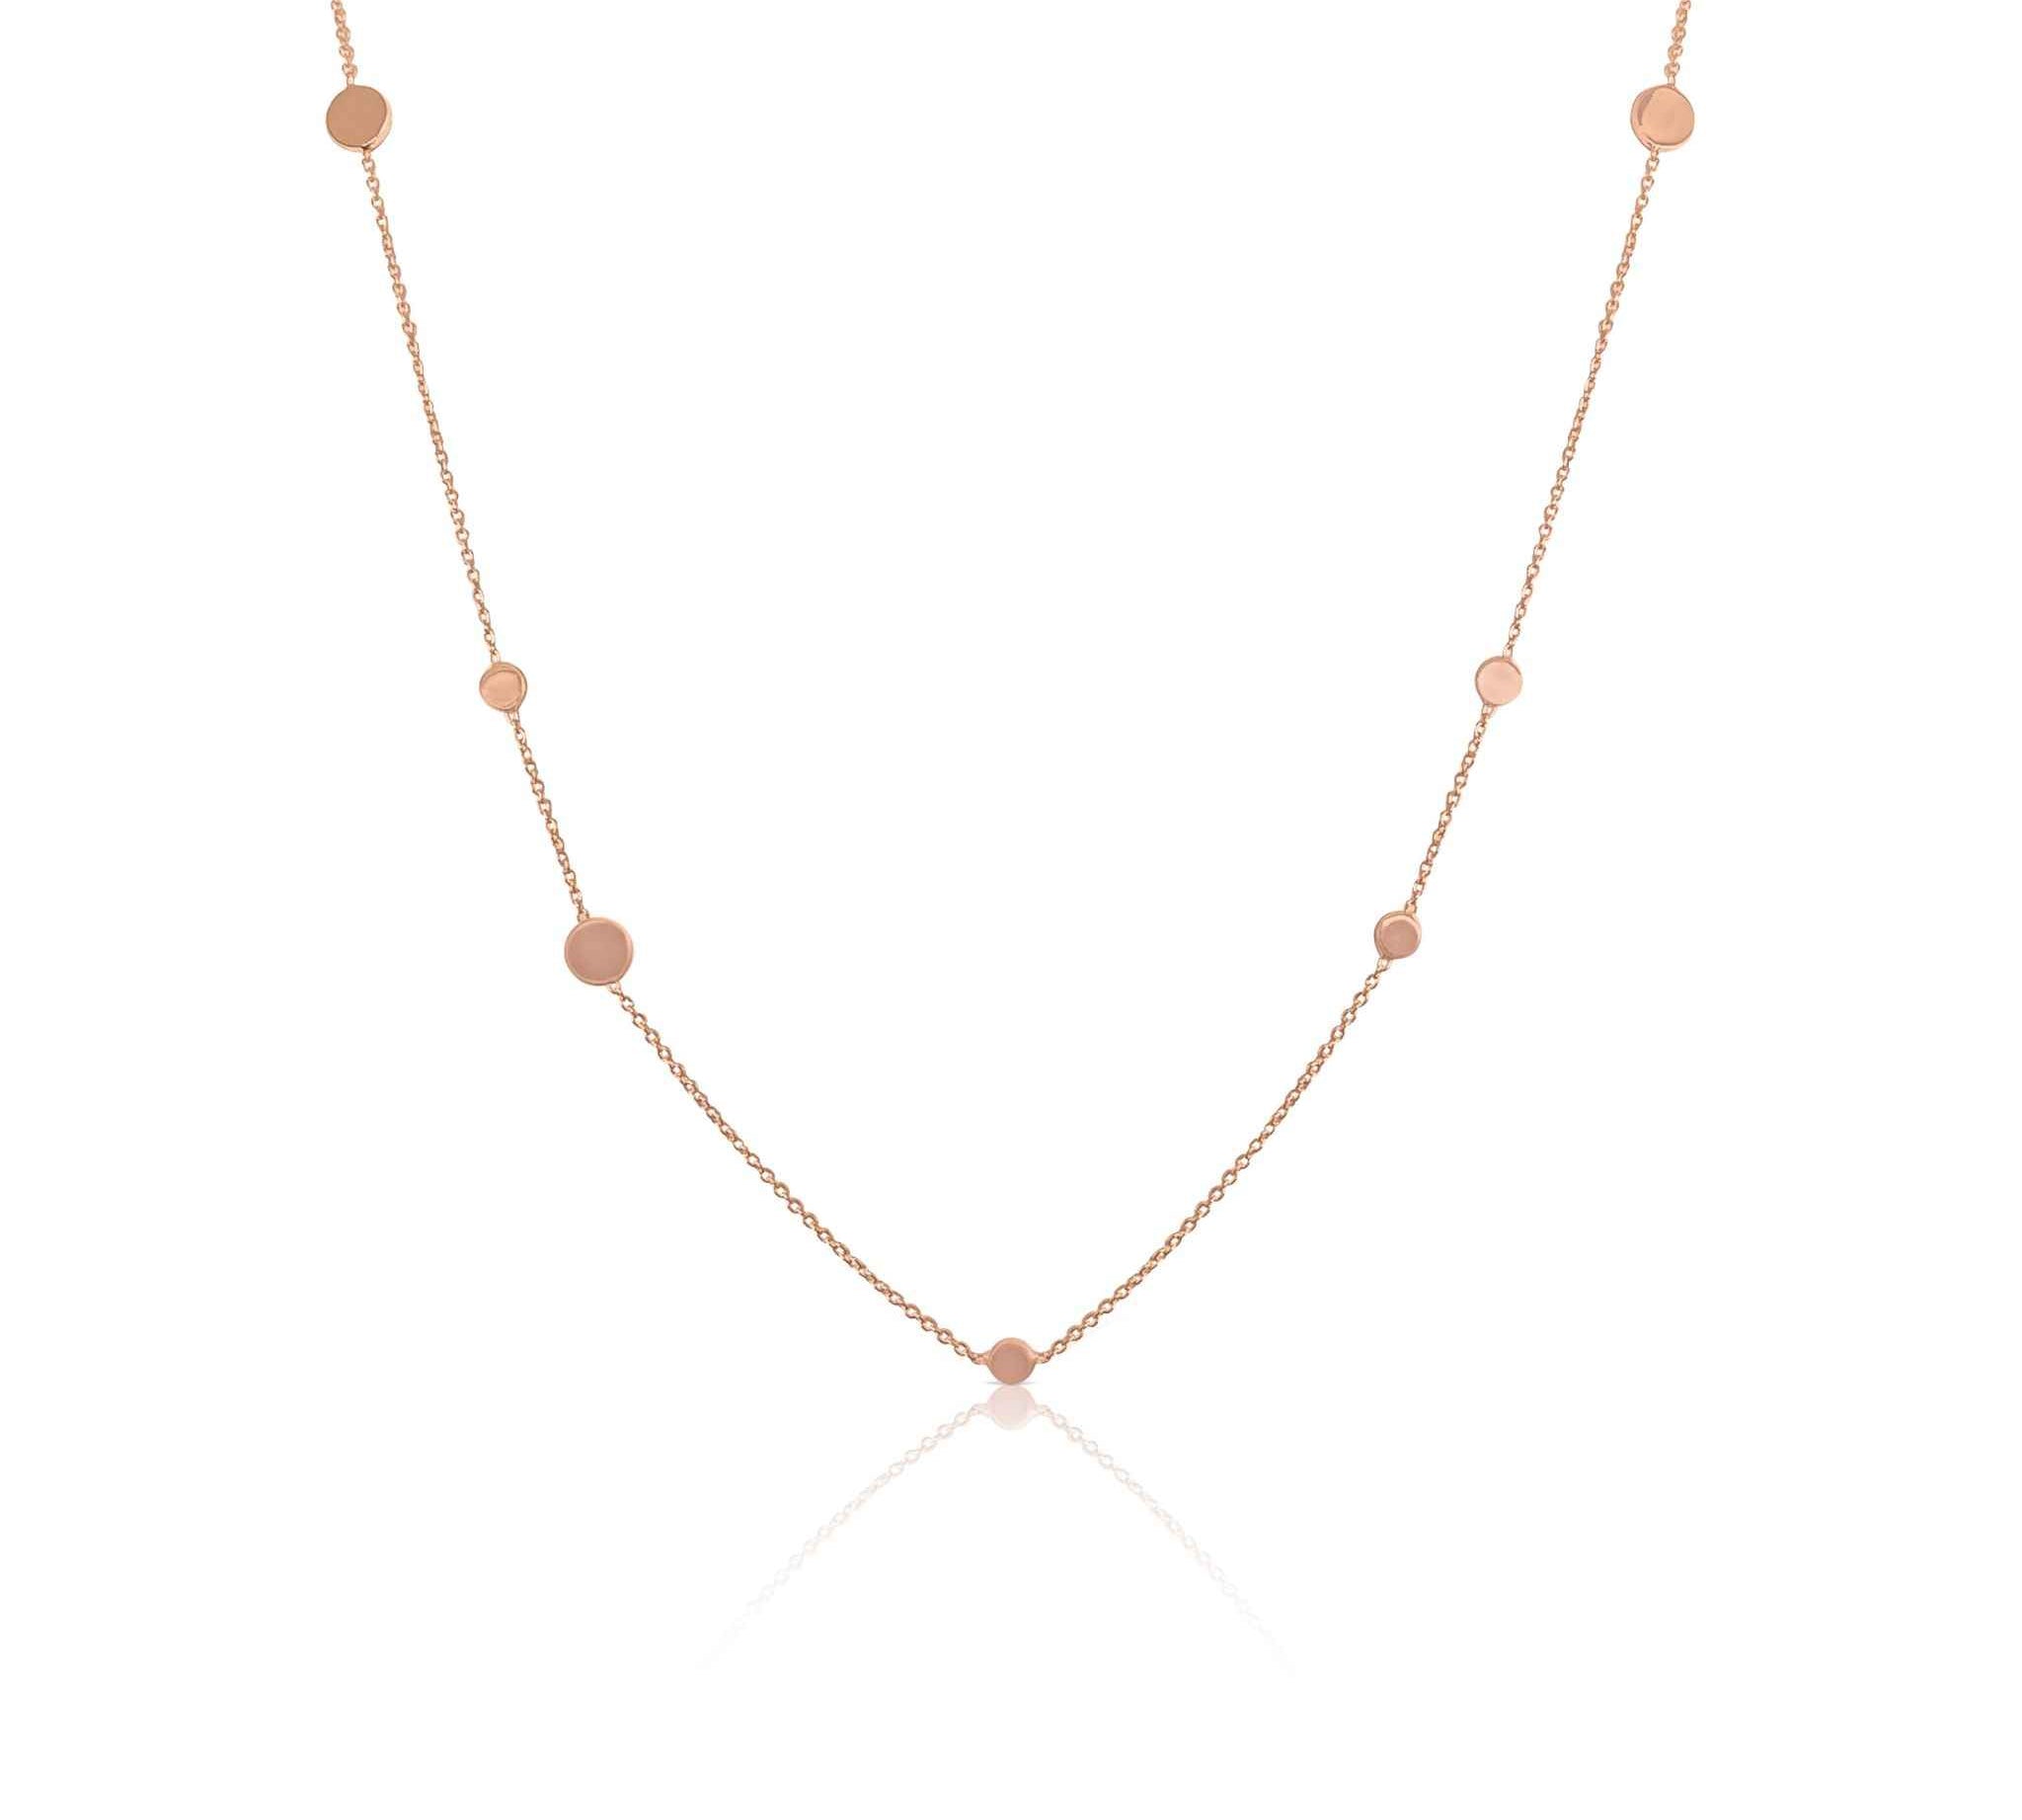 Elegant Women's Pebble Necklace in Rose Gold by Alessandra James, opera-length with irregularly spaced round pebbles.